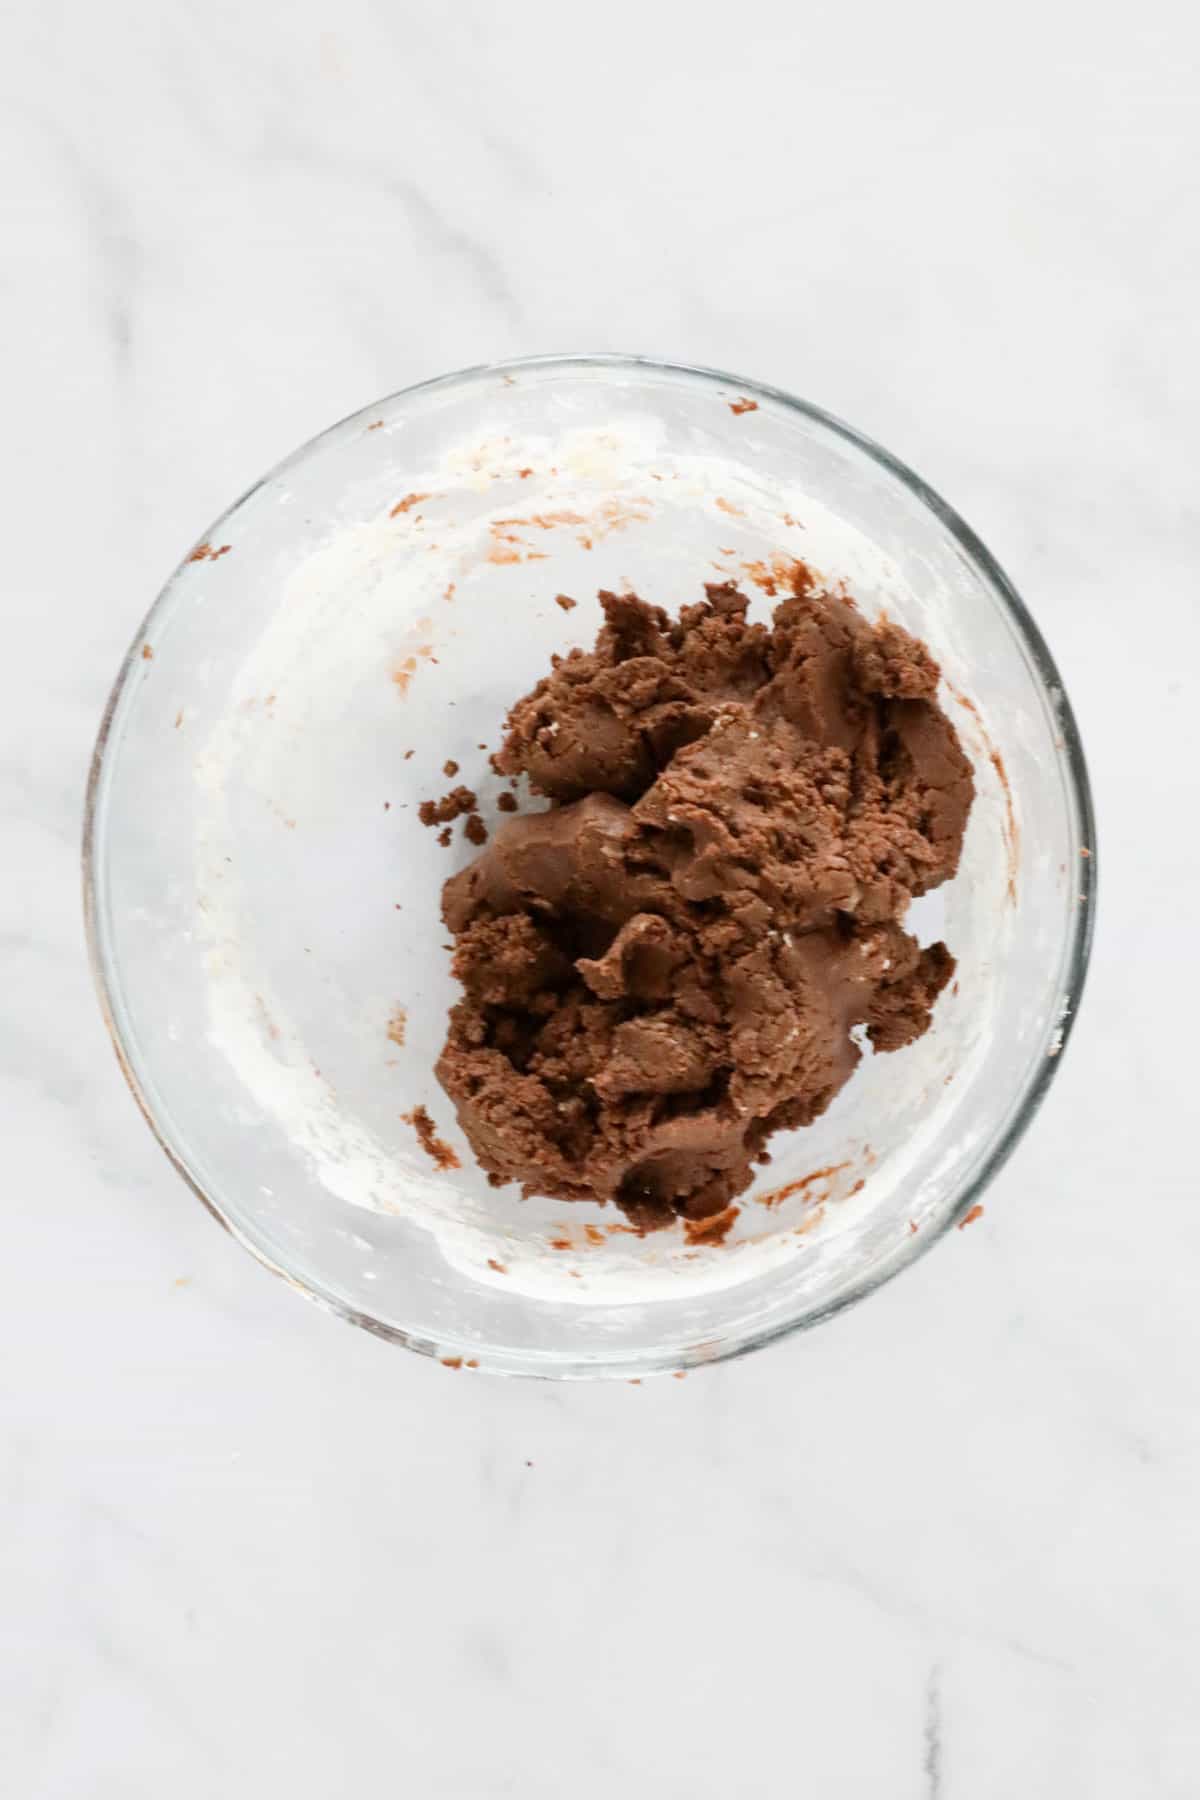 A chocolate coloured dough in a glass bowl.